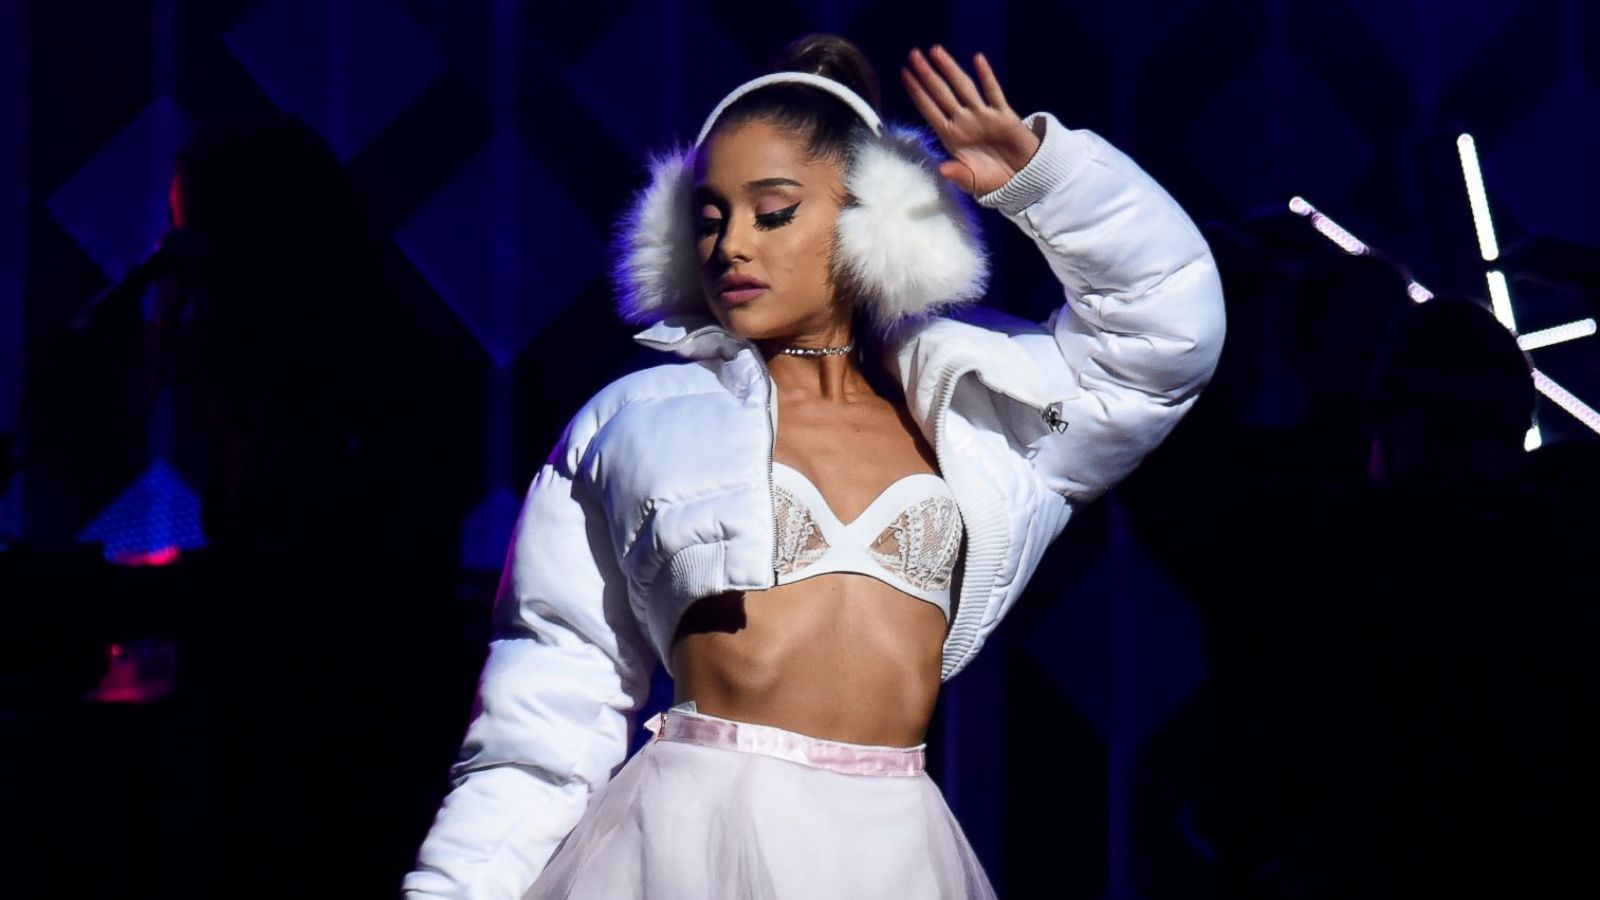 Ariana Grande: 'I'm not comfortable being forwardly sexual